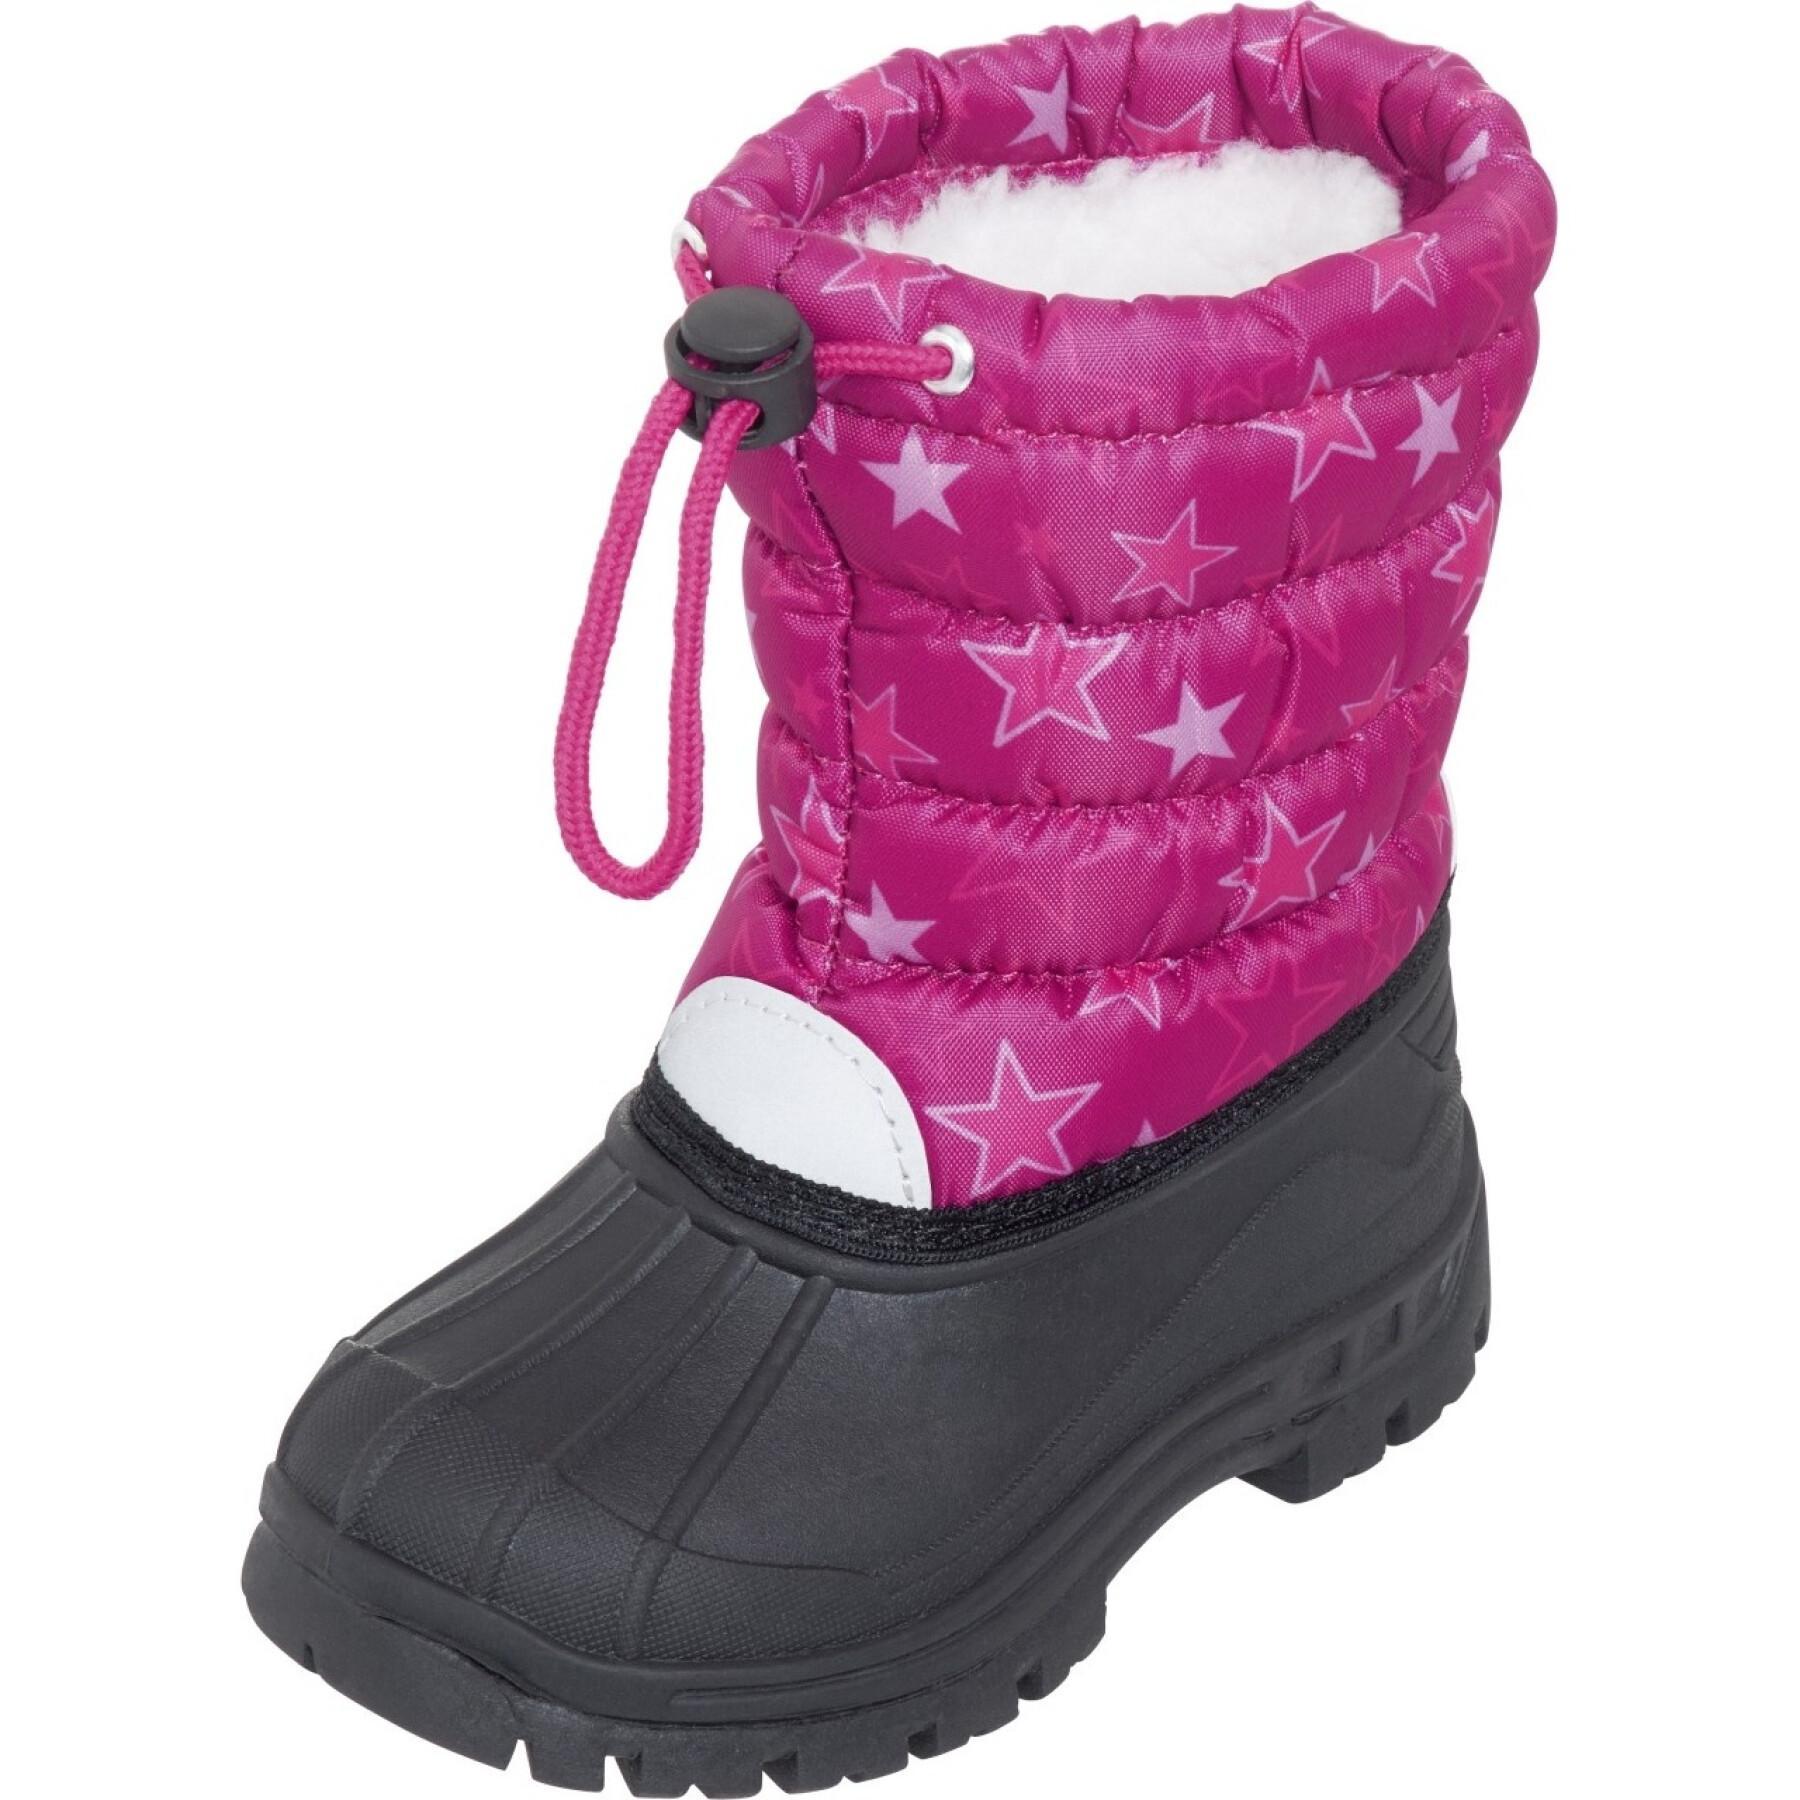 Winter boots girl Playshoes Stars